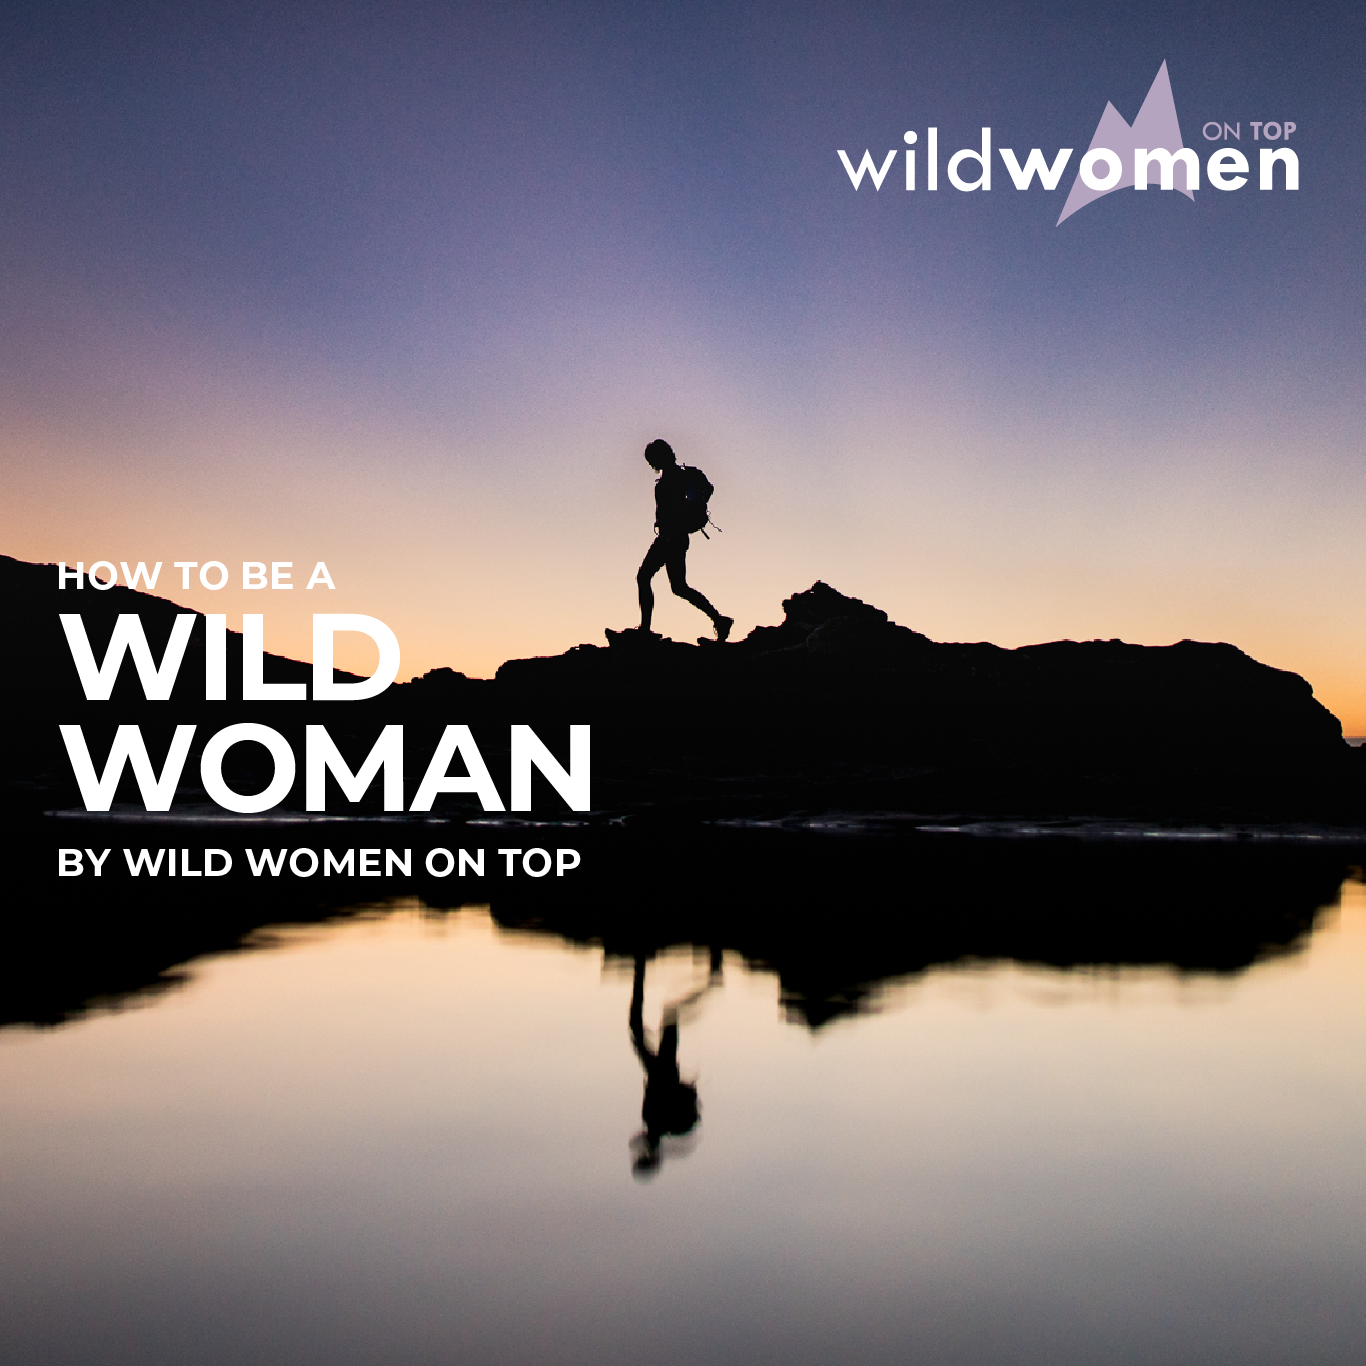 How To Be A Wild Woman